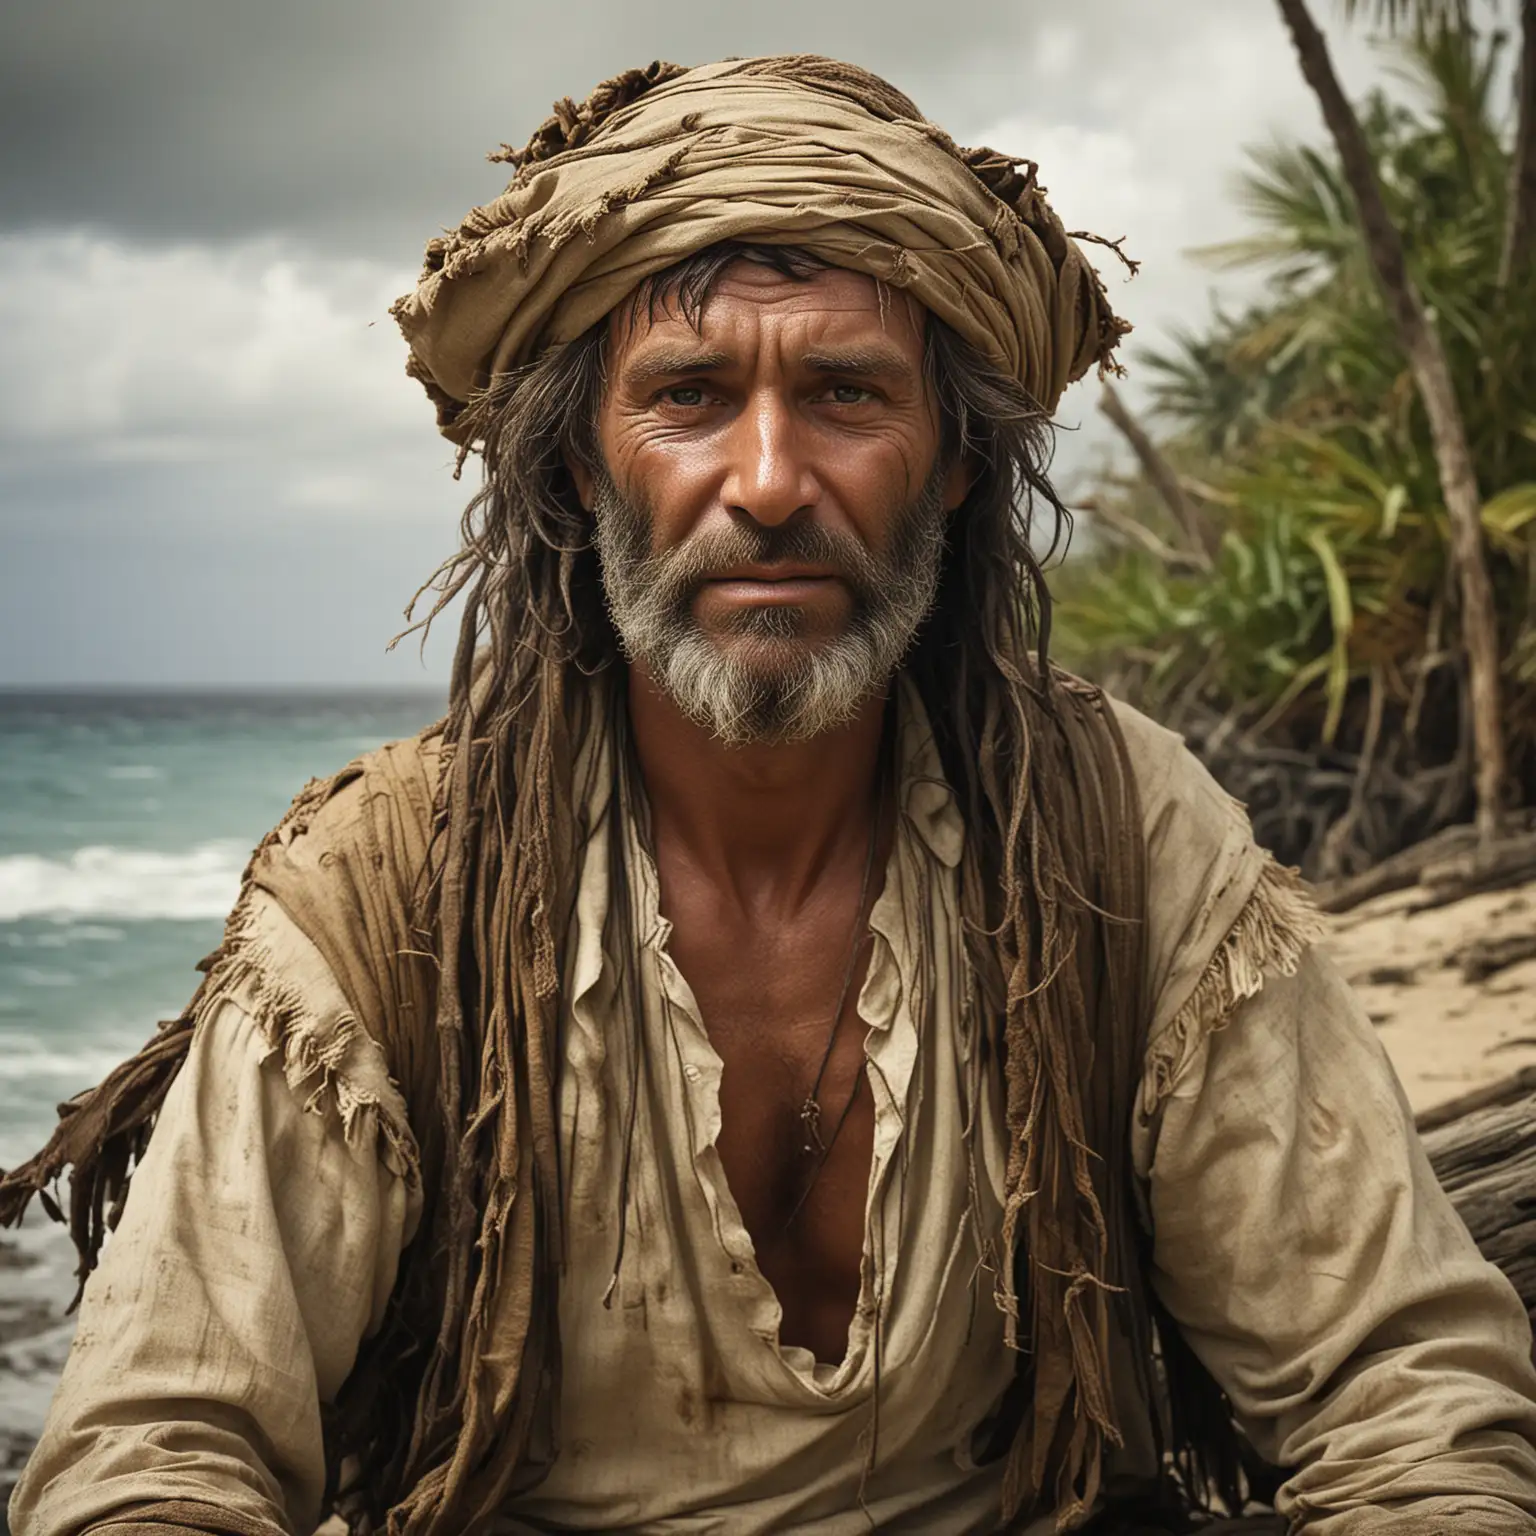 Robinson Crusoe is typically depicted as a middle-aged man with a weather-beaten face, reflecting years spent outdoors. His face bears the marks of his survival experiences, with lines etched from sun exposure and hardship. Crusoe's hair is often described as unkempt and sun-bleached, swept back from his forehead, further emphasizing his rugged appearance.

In terms of clothing, Crusoe's attire reflects his resourcefulness and adaptation to his environment. At the beginning of his adventure, he wears the clothes typical of a 17th-century Englishman, but as he becomes stranded on the deserted island, his clothing gradually transforms. He crafts garments from materials he finds on the island, such as animal skins and woven fibers, resulting in a more primitive and utilitarian appearance.

Over time, Crusoe's appearance becomes increasingly wild and untamed, mirroring his assimilation into the natural world and his reliance on survival instincts. His clothing becomes a reflection of his self-reliance and ingenuity, embodying the essence of his solitary existence on the deserted island.